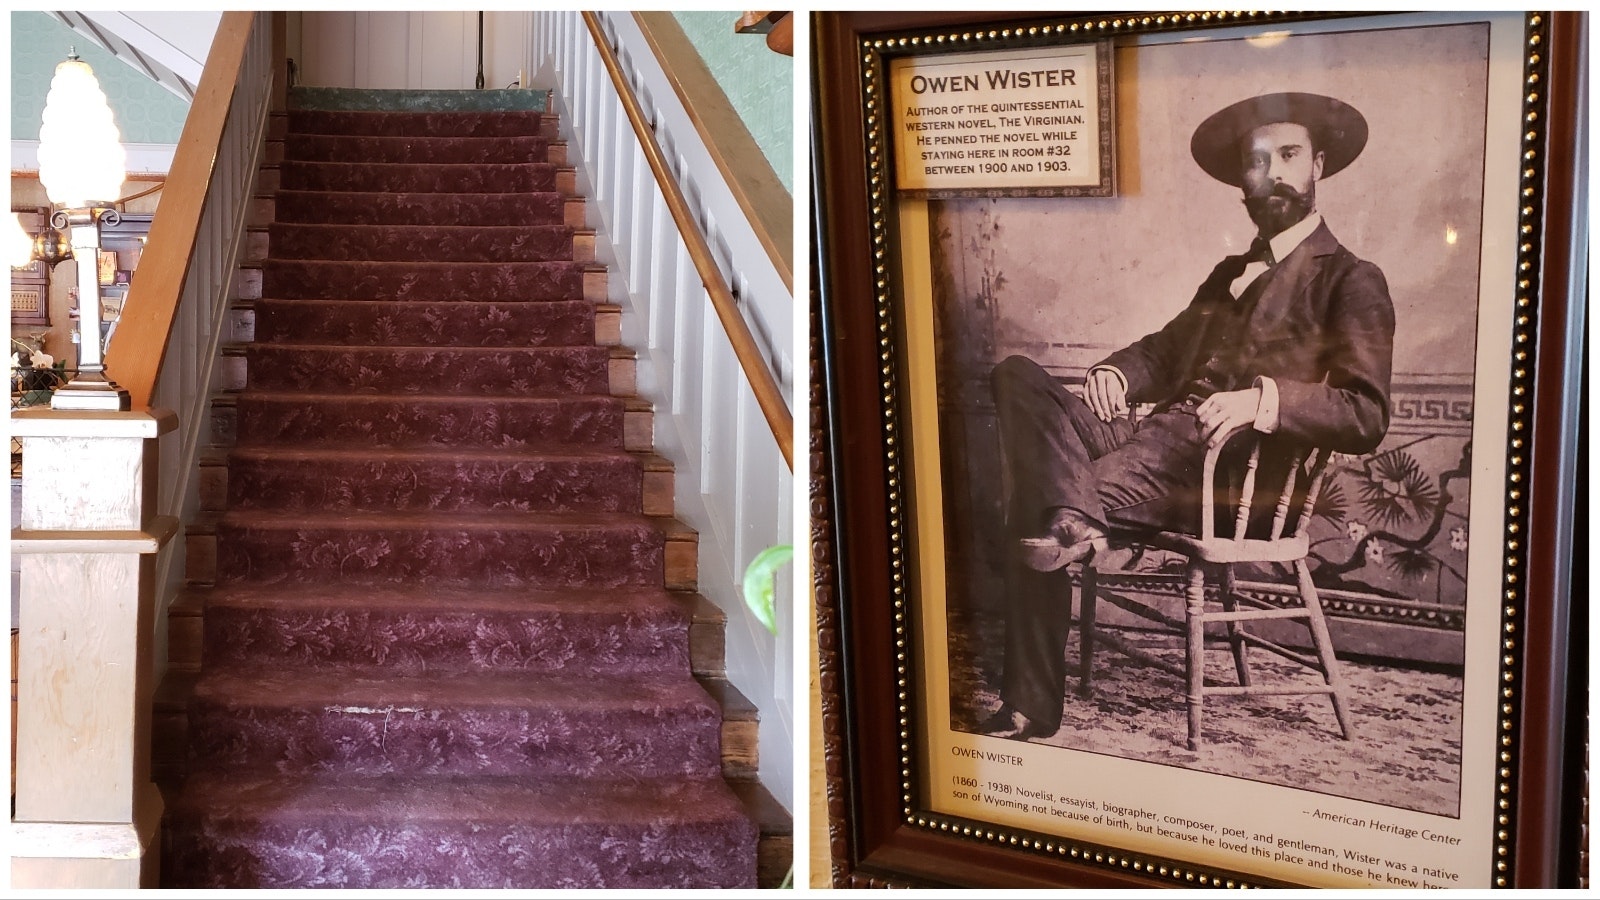 Most of the hotel rooms are up these elegant stairs, 18 rooms with 18 personalities await. At right, author Owen Wister wrote the Western novel "The Virginian" at the Occidental Hotel in Buffalo, Wyoming.